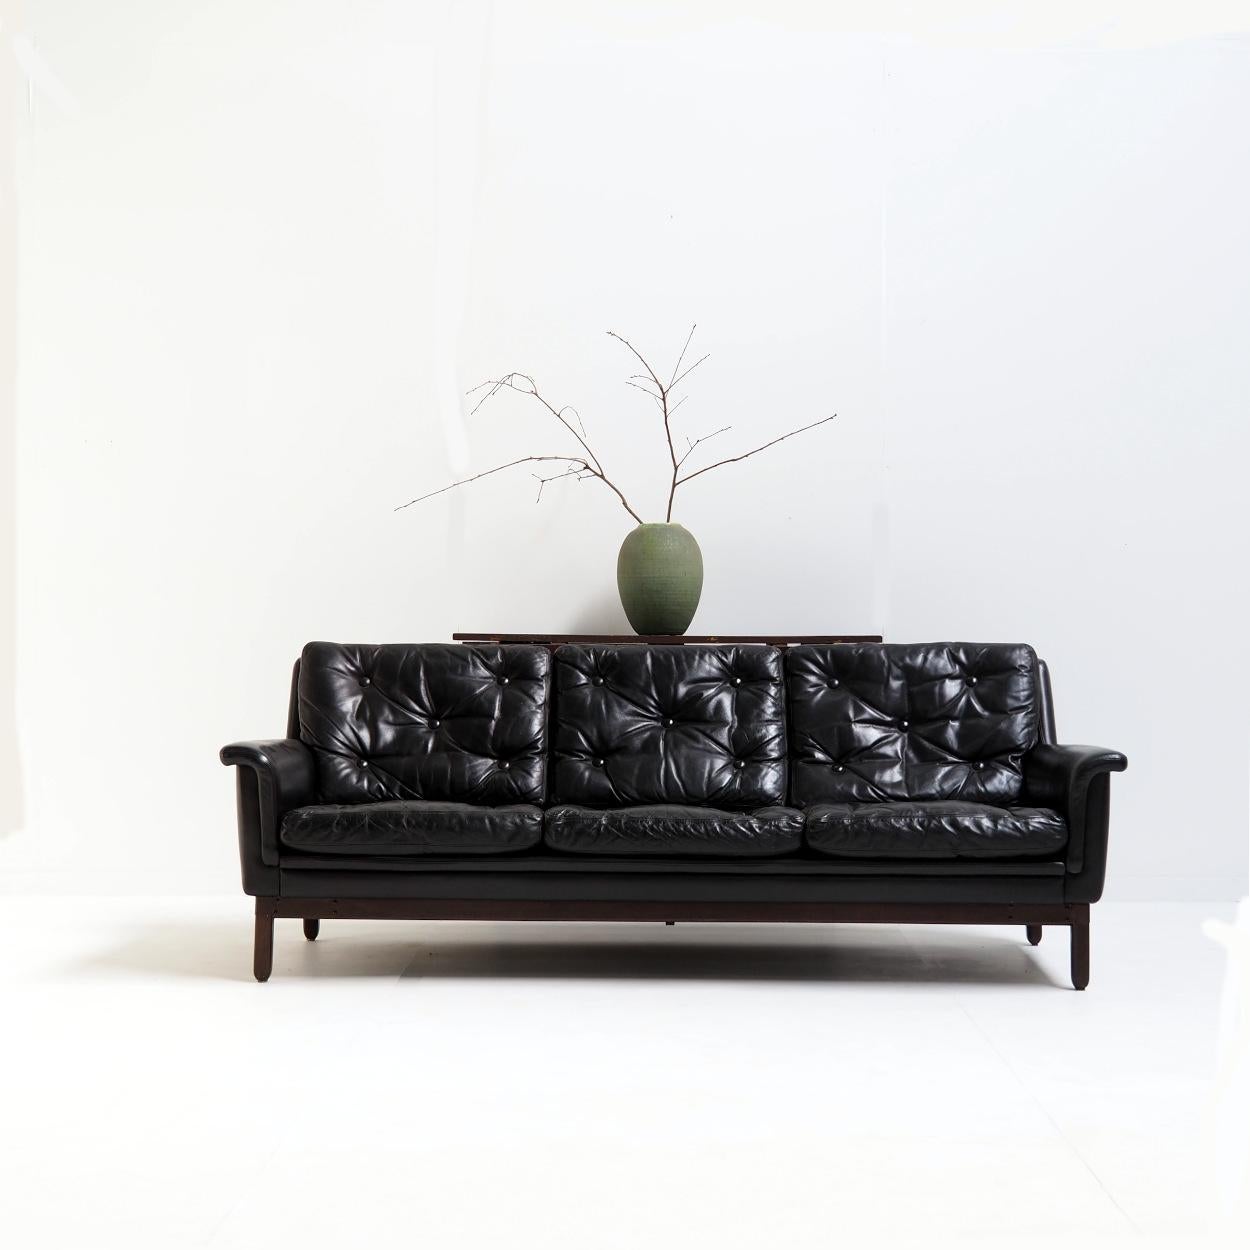 A beautiful black leather sofa of Scandinavian origin. Please note the sloping backrest, which gives the whole a beautiful appearance but also ensures a comfortable seat. The soft black leather is still in mint condition.

I’m not 100 % sure about